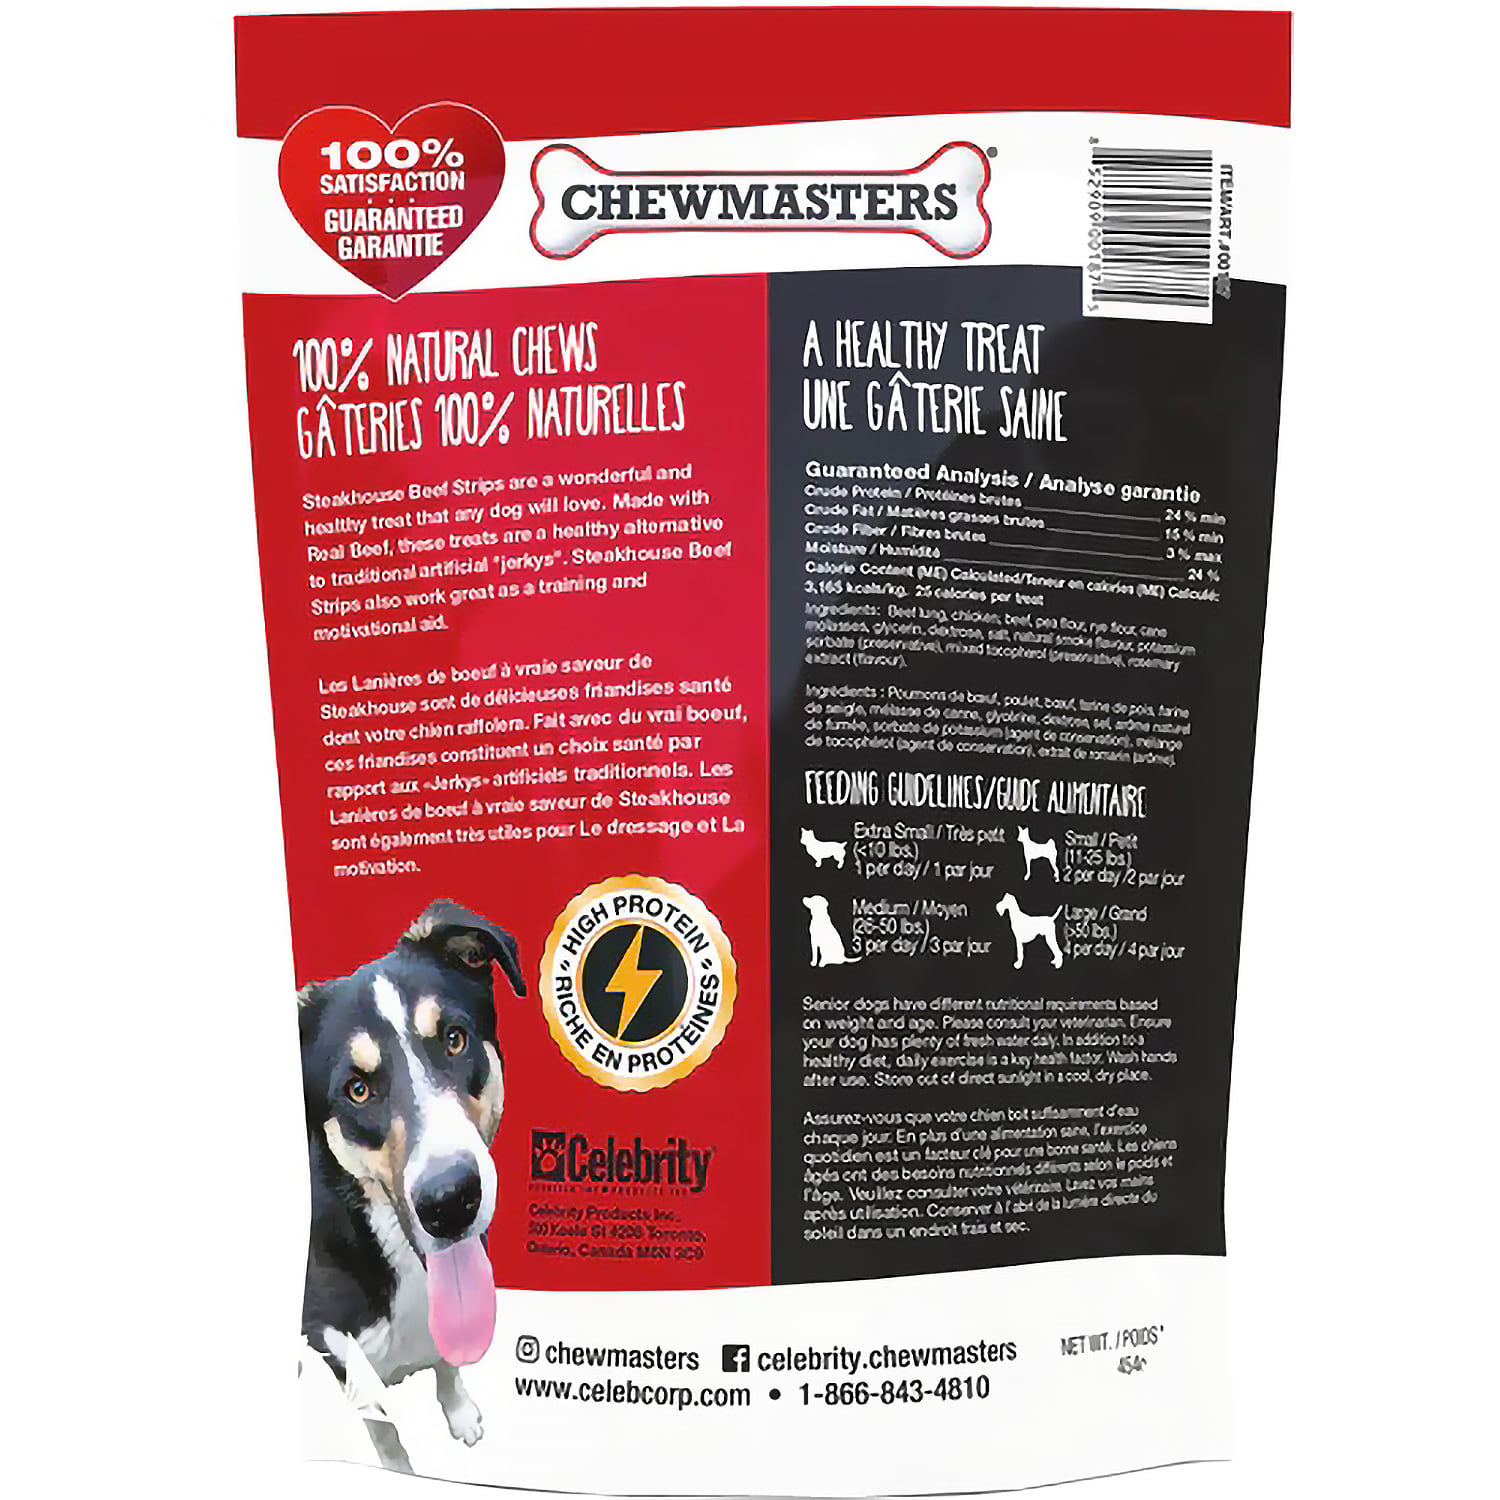 Chewmasters Steakhouse Beef Strips – 454g